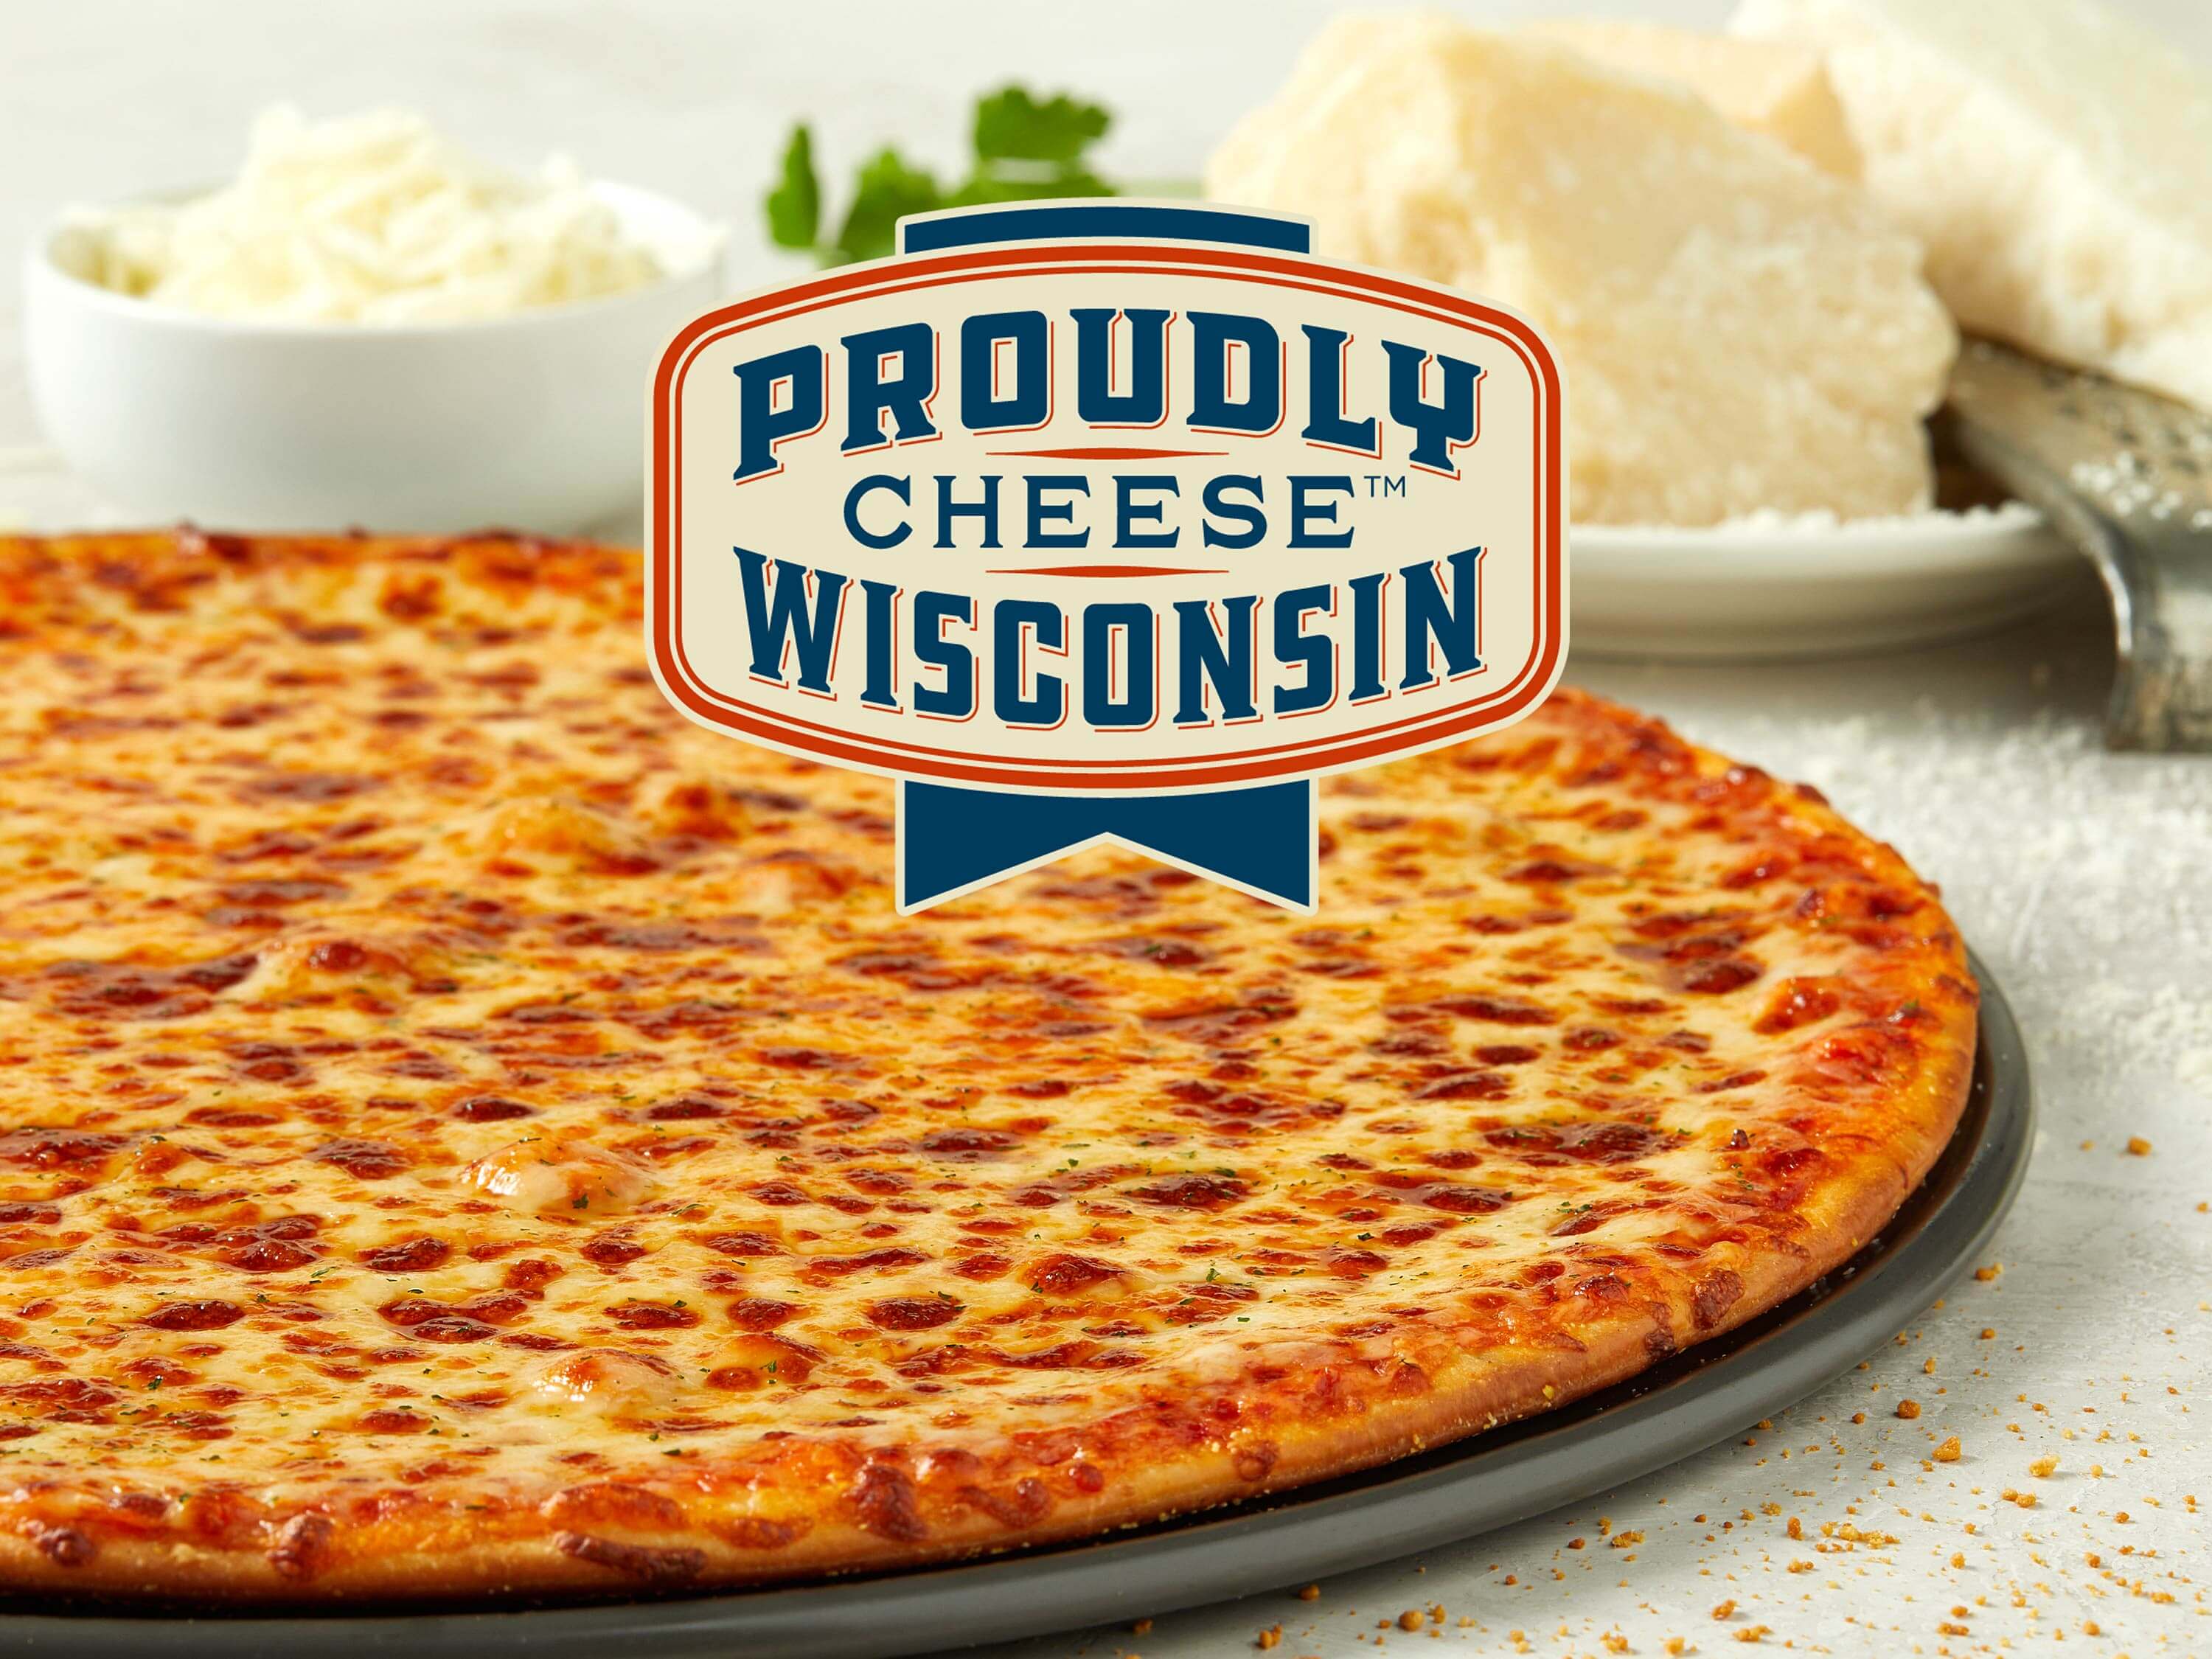 Loaded Edge to Edge® with real aged smoked Wisconsin Provolone cheese.